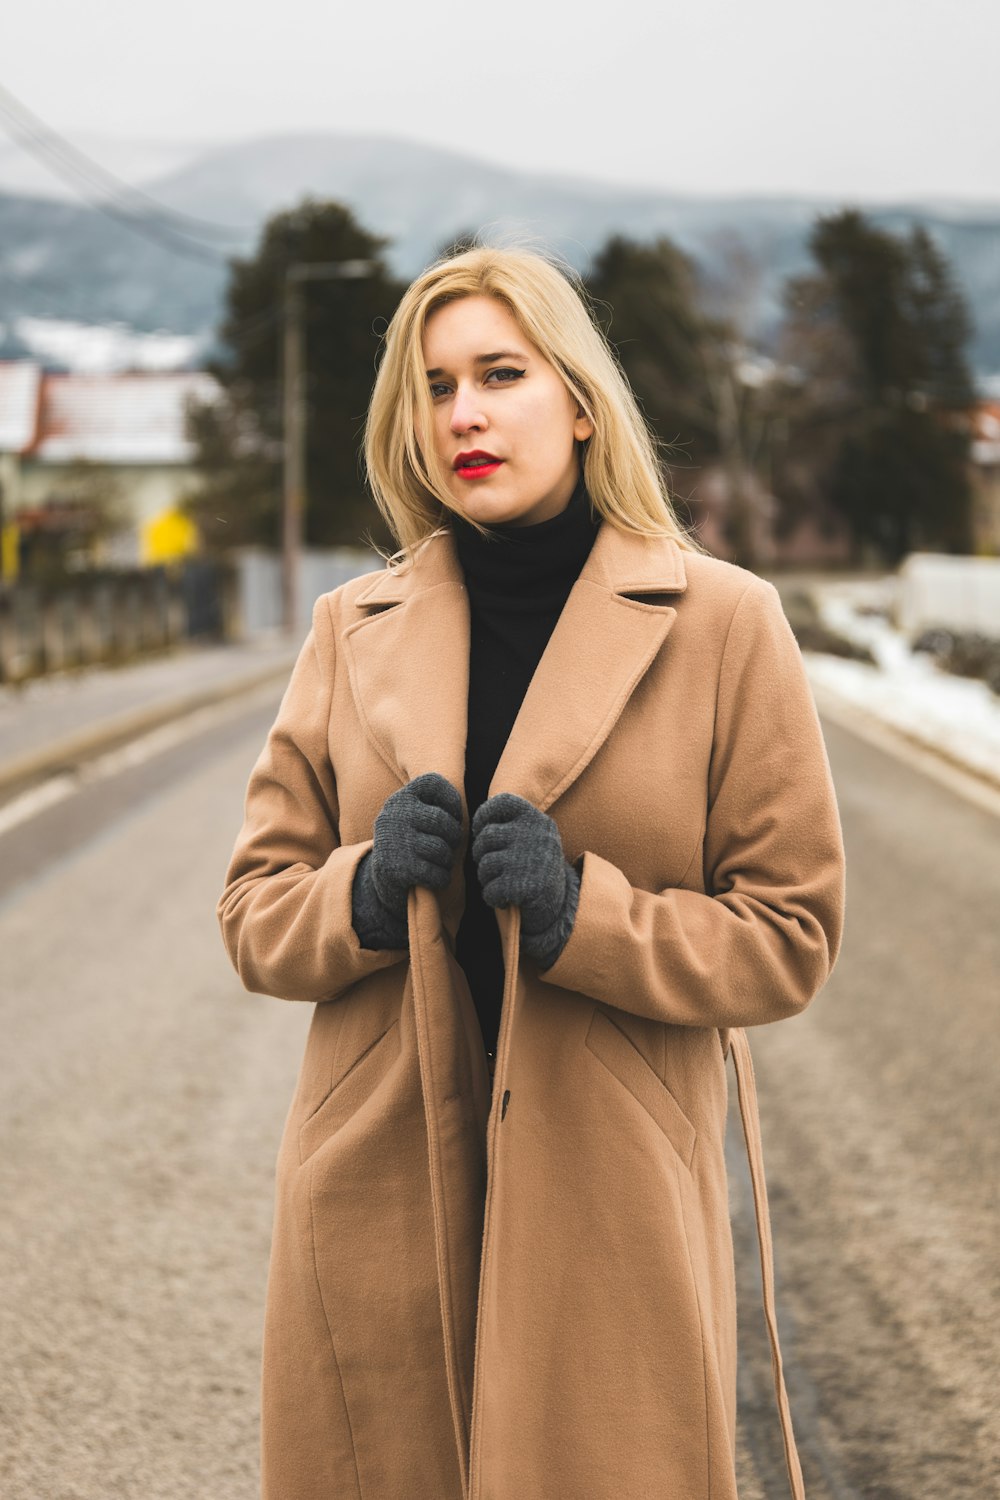 a woman standing on a road wearing a coat and gloves